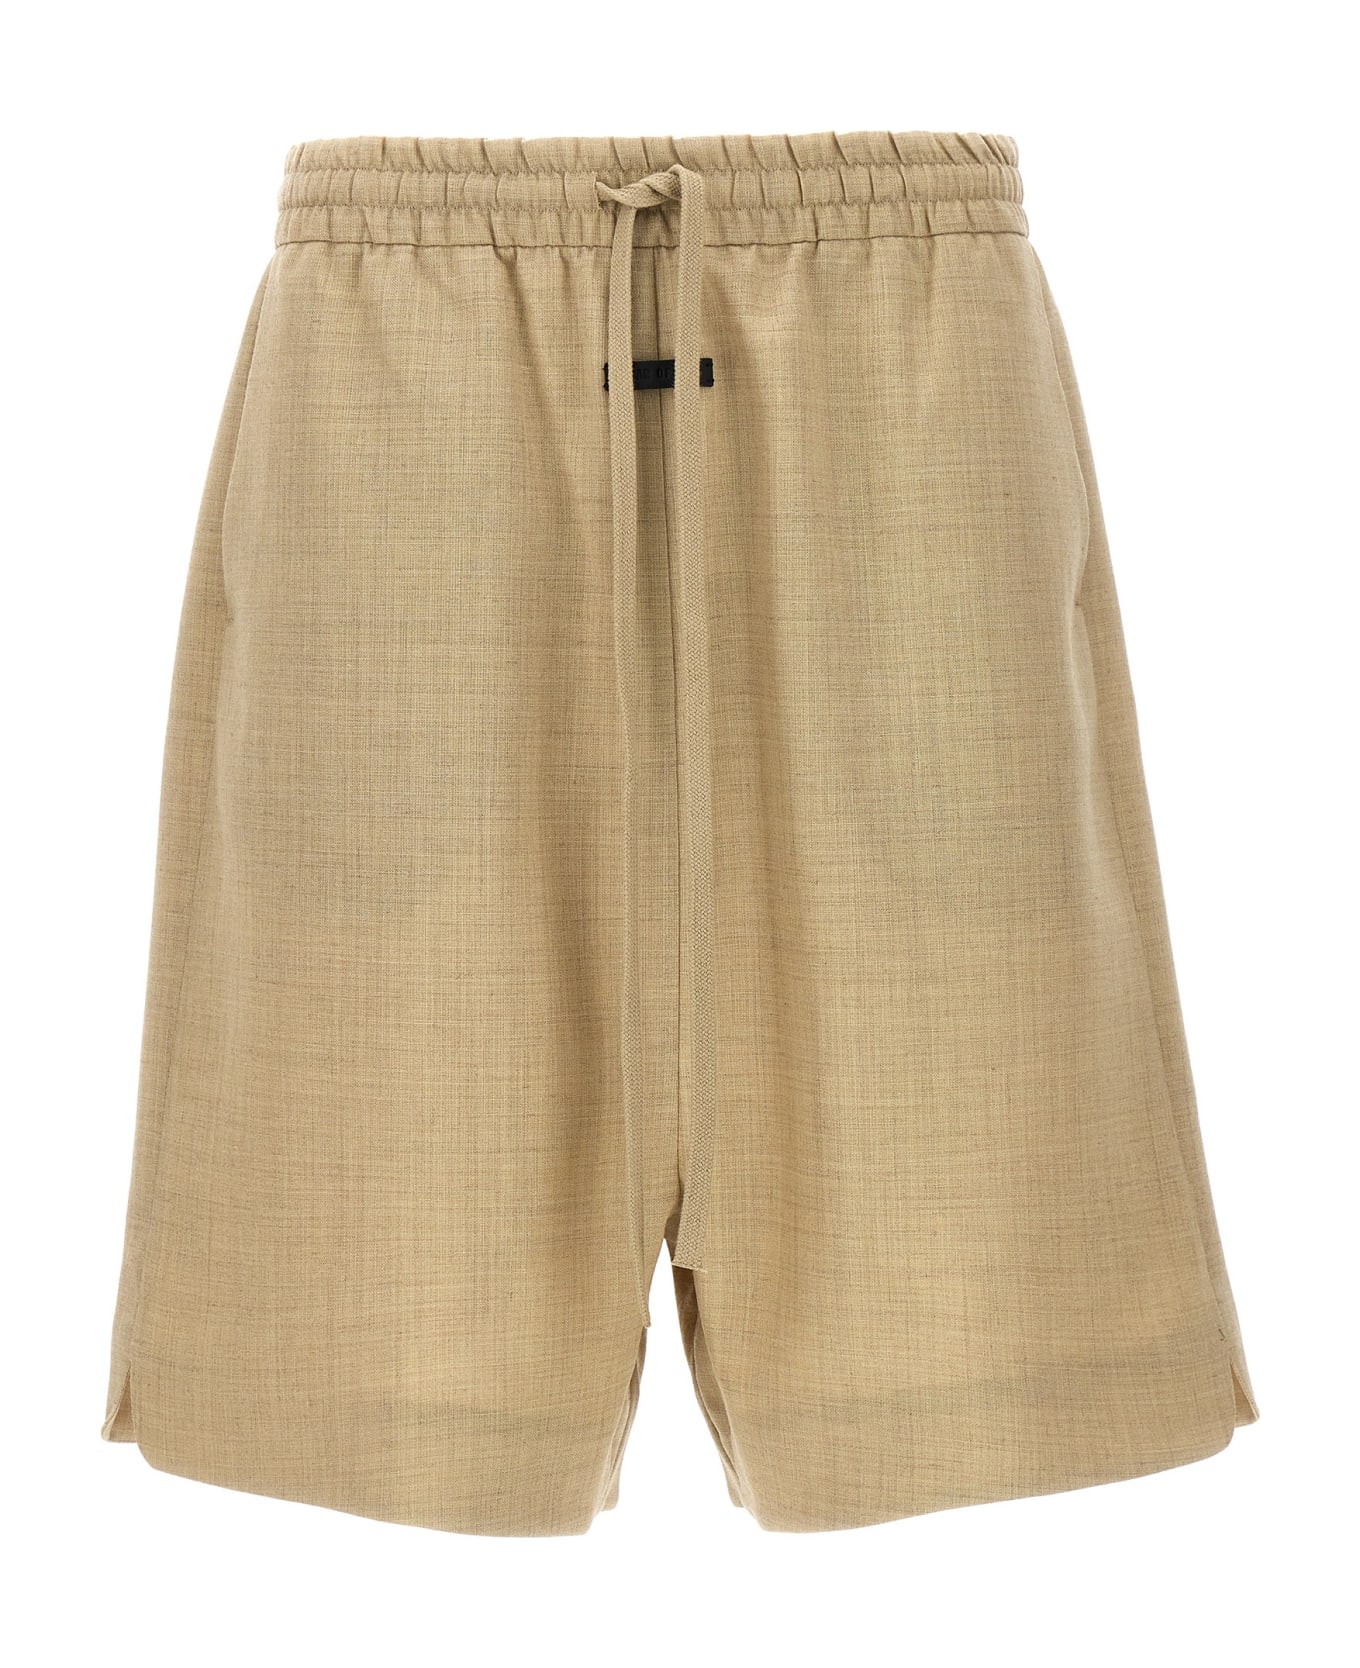 Fear of God 'relaxed' Shorts - Beige